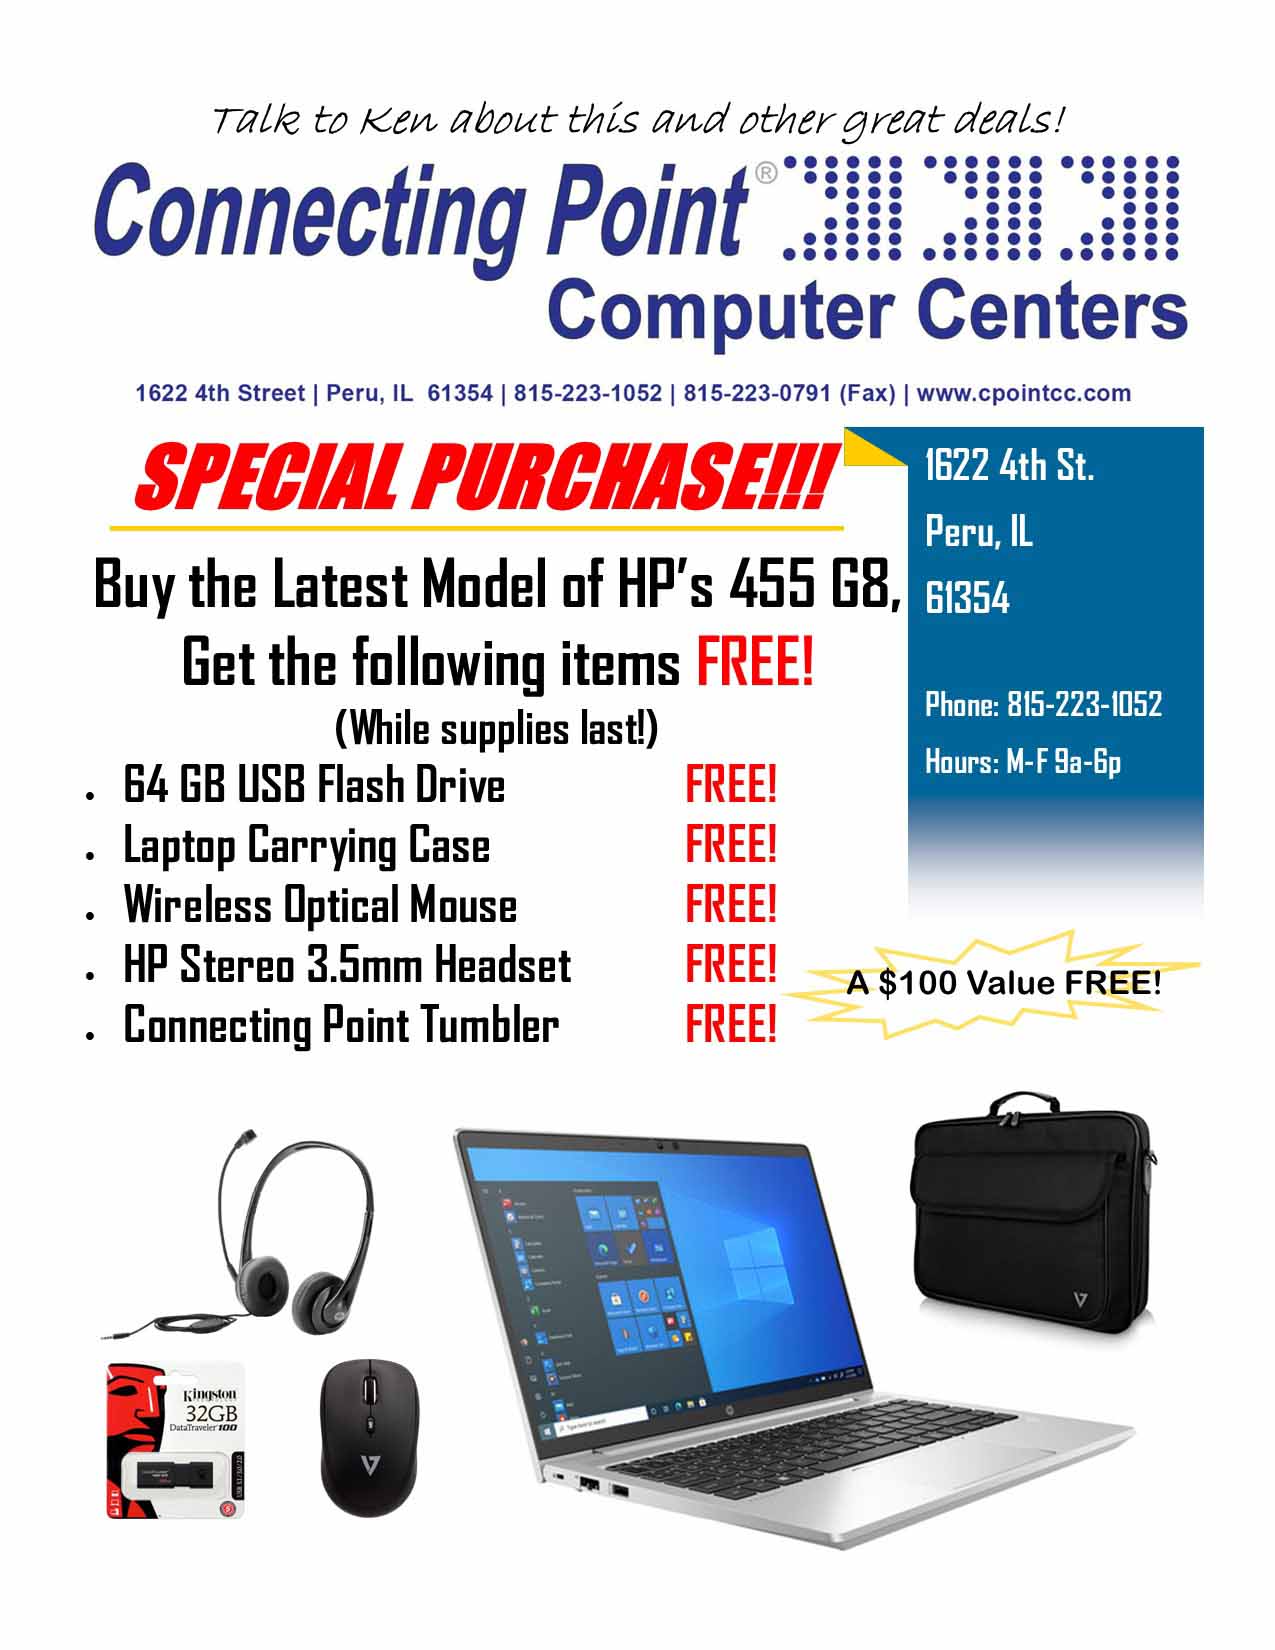 Special Purchase HP 455 G8 & Get FREE Items